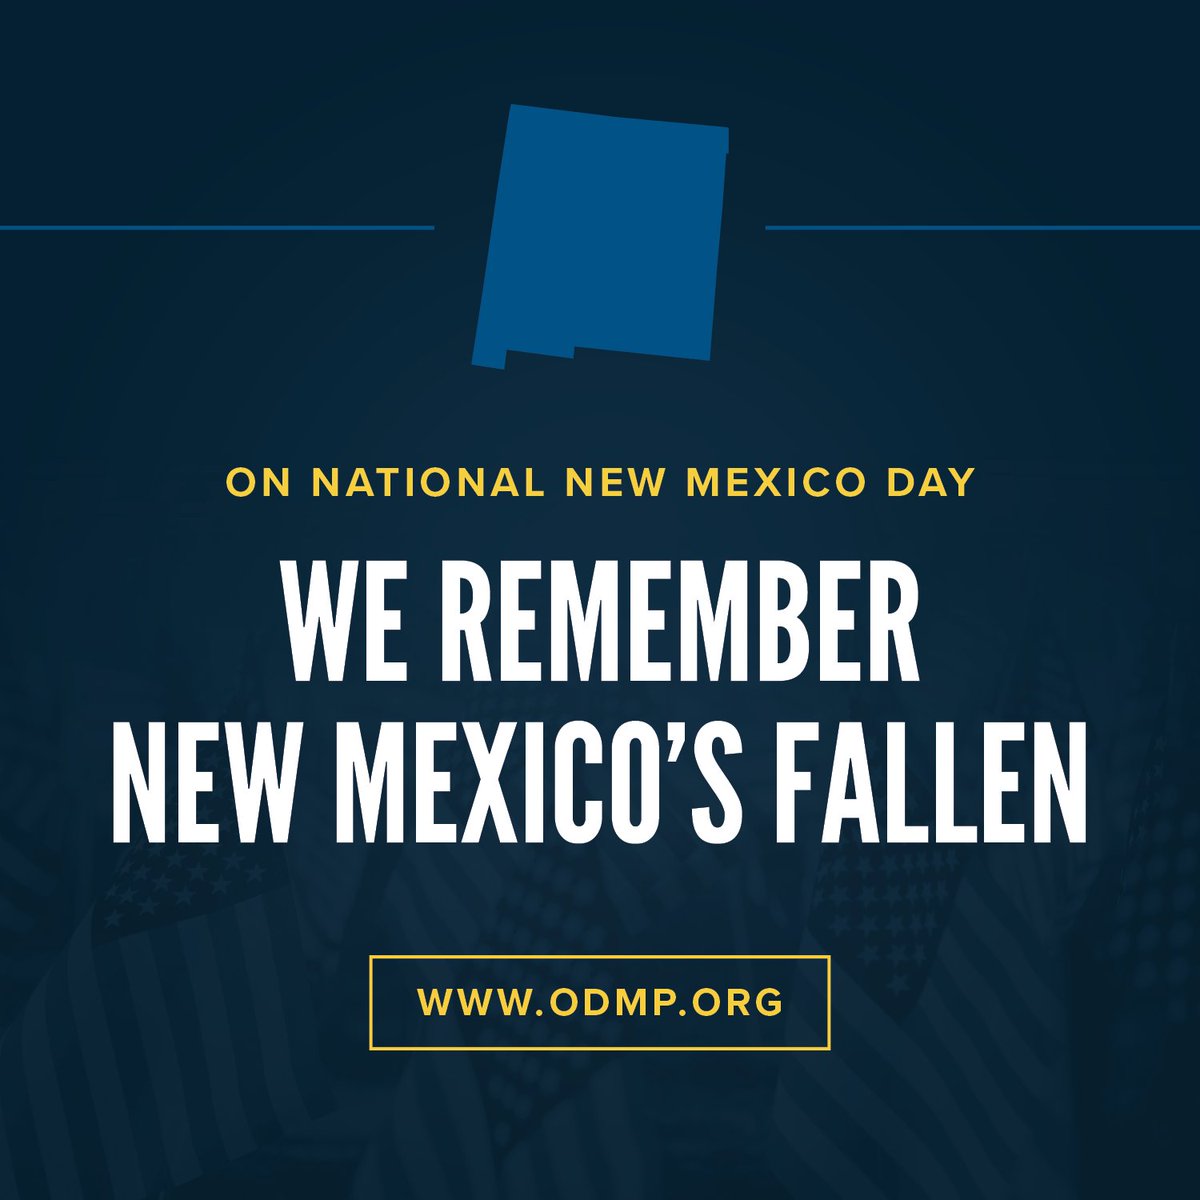 Today is National New Mexico Day. In honor of this, ODMP recognizes those officers that made the ultimate sacrifice while serving and protecting the citizens of New Mexico.

Full biographies for each of these fallen heroes can be found at: odmp.org/search/browse/…